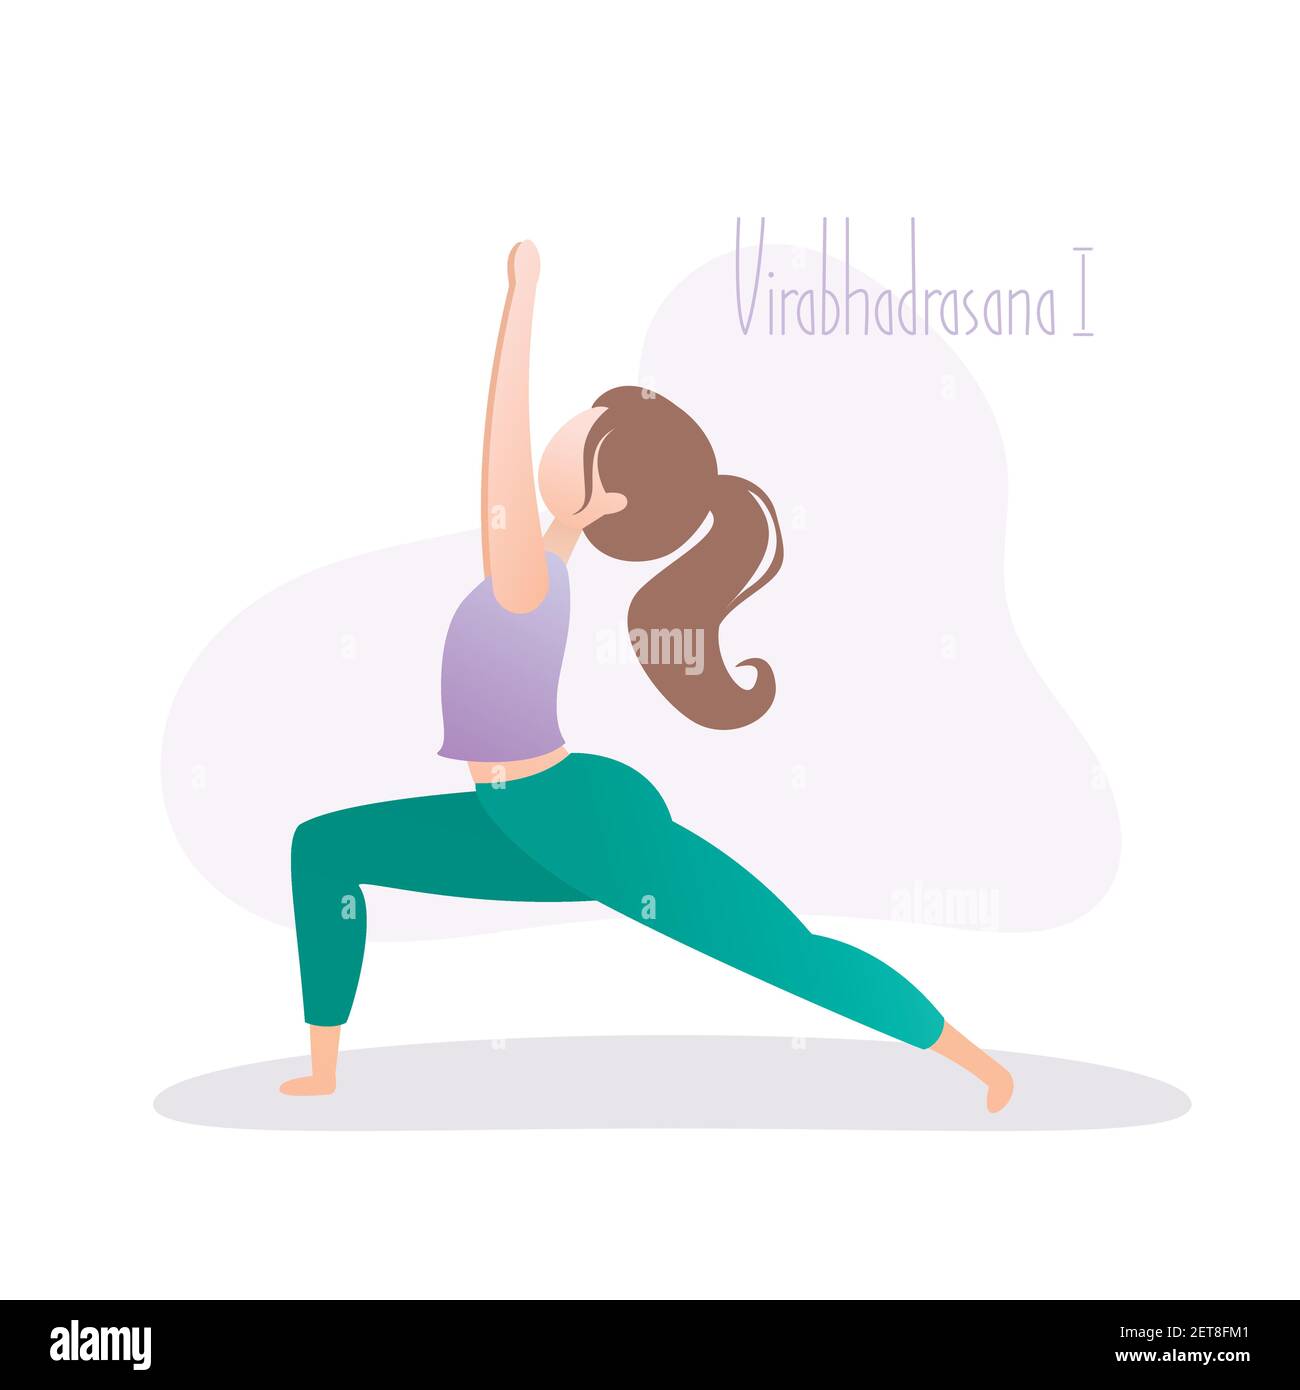 weight loss yoga: Six transformative yoga asanas to help you lose weight  faster - The Economic Times